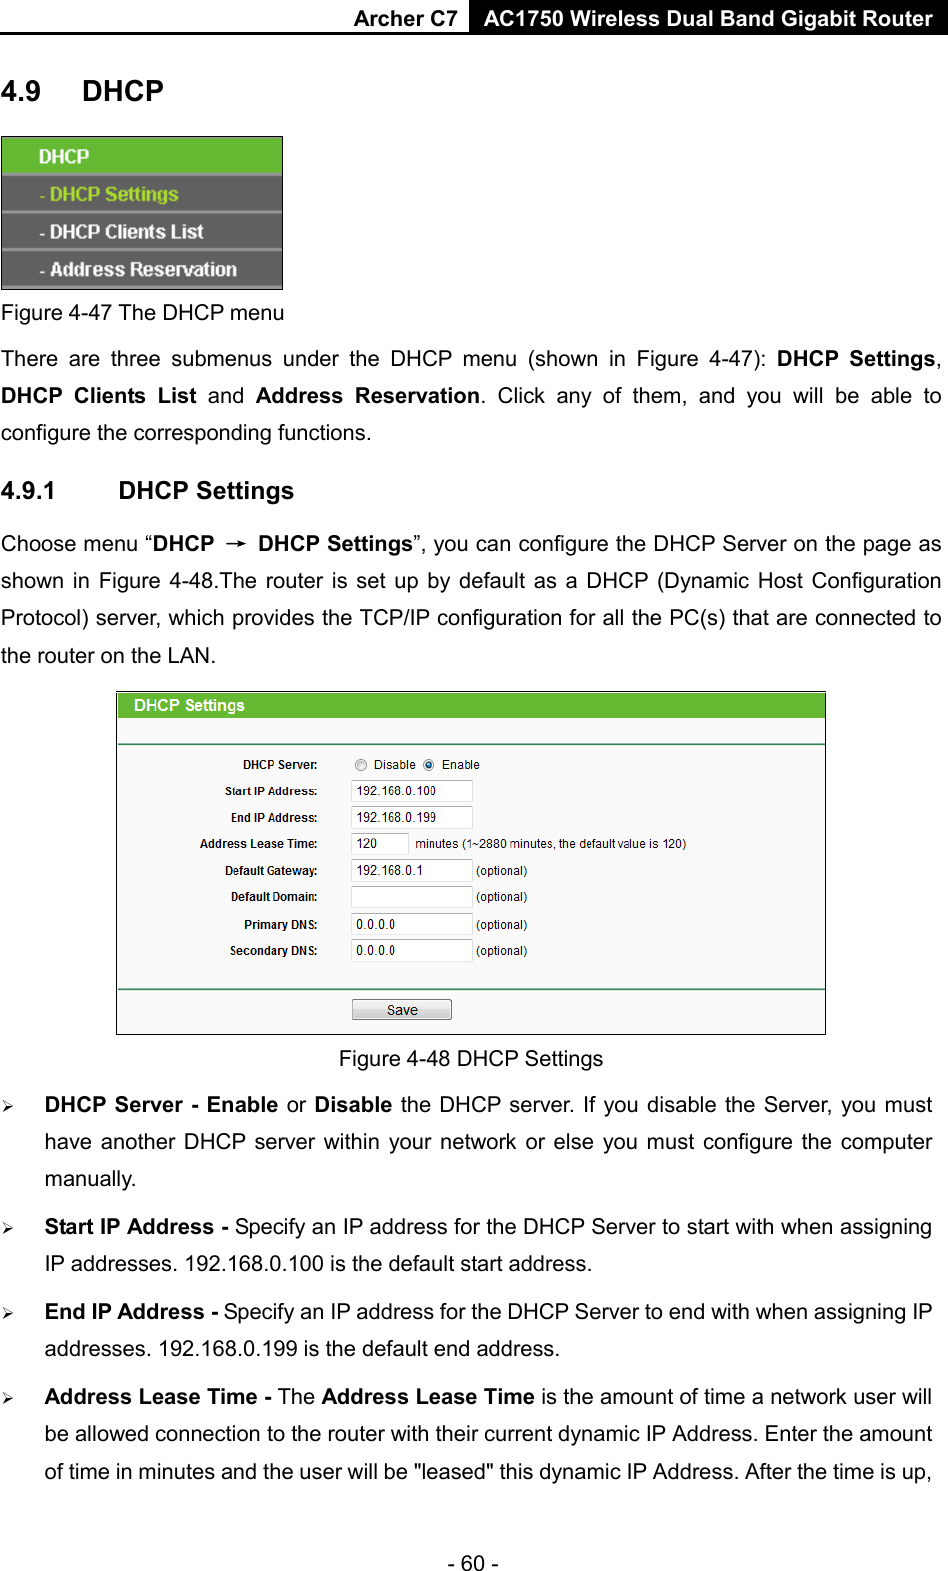 Archer C7 AC1750 Wireless Dual Band Gigabit Router  - 60 - 4.9 DHCP  Figure 4-47 The DHCP menu There are three submenus under the DHCP menu (shown in Figure  4-47):  DHCP Settings, DHCP Clients List and  Address Reservation. Click any of them, and you will be able to configure the corresponding functions. 4.9.1 DHCP Settings Choose menu “DHCP → DHCP Settings”, you can configure the DHCP Server on the page as shown in Figure 4-48.The  router is set up by default as a DHCP (Dynamic Host Configuration Protocol) server, which provides the TCP/IP configuration for all the PC(s) that are connected to the router on the LAN.    Figure 4-48 DHCP Settings  DHCP Server - Enable or Disable the DHCP server. If you disable the Server, you must have another DHCP server within your network or else you must configure the computer manually.  Start IP Address - Specify an IP address for the DHCP Server to start with when assigning IP addresses. 192.168.0.100 is the default start address.  End IP Address - Specify an IP address for the DHCP Server to end with when assigning IP addresses. 192.168.0.199 is the default end address.  Address Lease Time - The Address Lease Time is the amount of time a network user will be allowed connection to the router with their current dynamic IP Address. Enter the amount of time in minutes and the user will be &quot;leased&quot; this dynamic IP Address. After the time is up, 